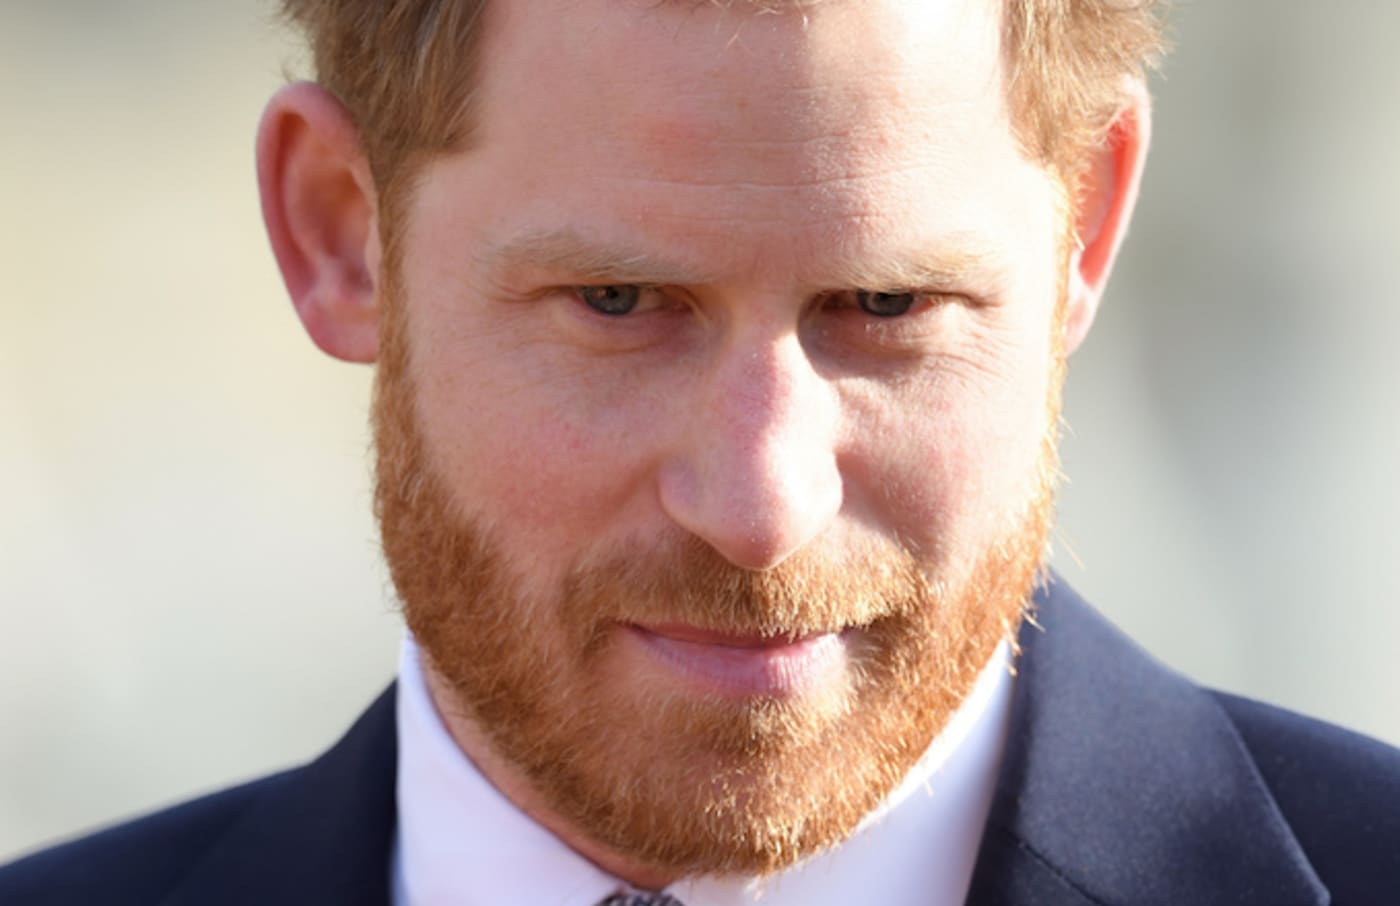 Prince Harry, Duke of Sussex hosts the Rugby League World Cup 2021.